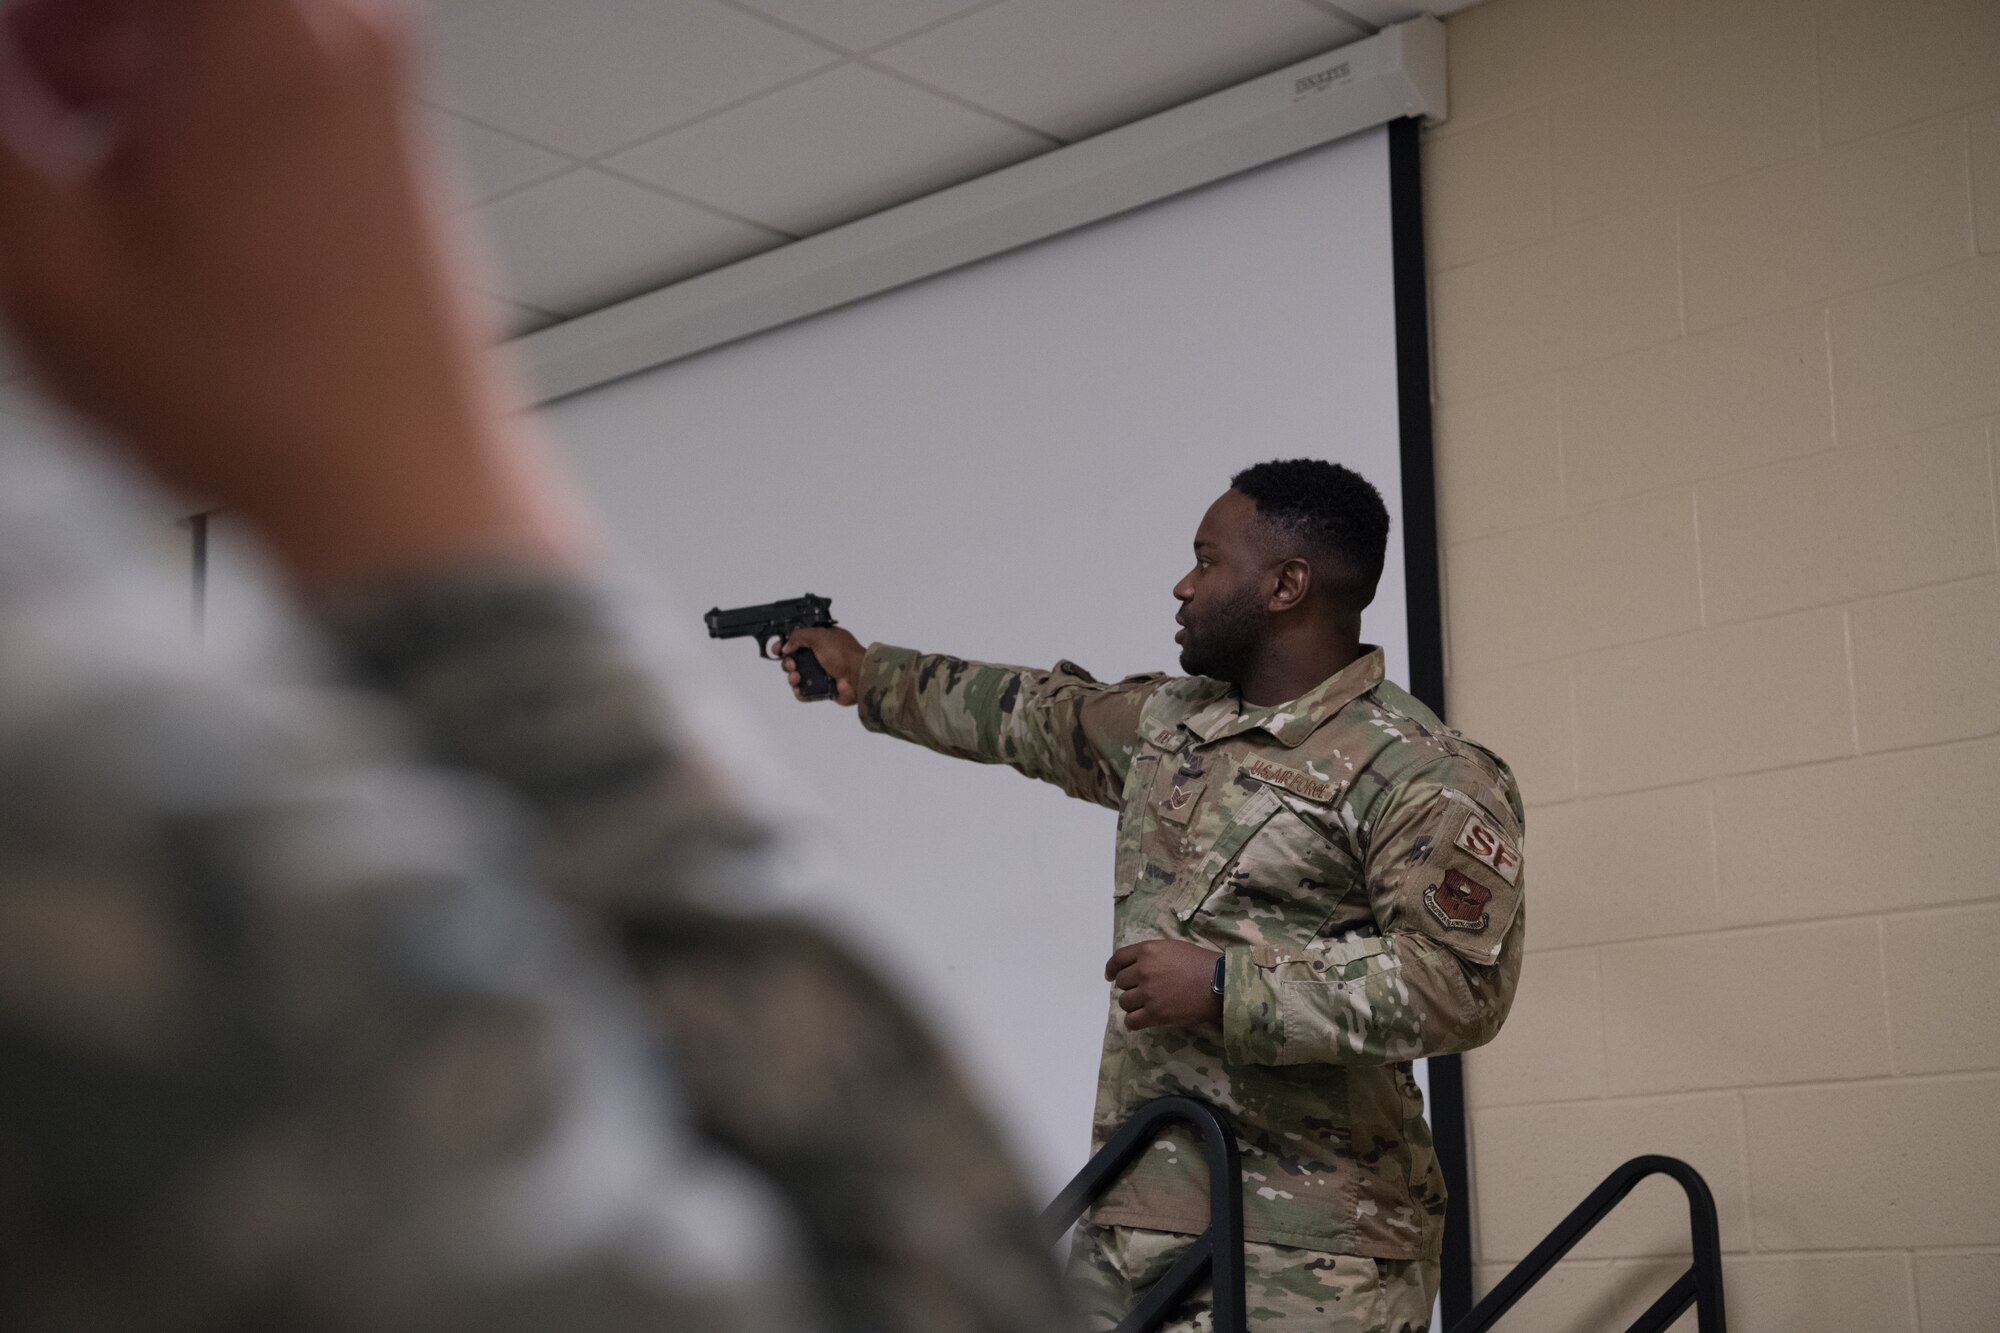 Staff Sgt. David Ikner demonstrates how to handle a Beretta M9 pistol safely with a class of cadets from the Air Force Reserve Officer Training Corps July 9, 2020, at the Combat Arms Training and Maintenance facility on Maxwell Air Force Base, Alabama.